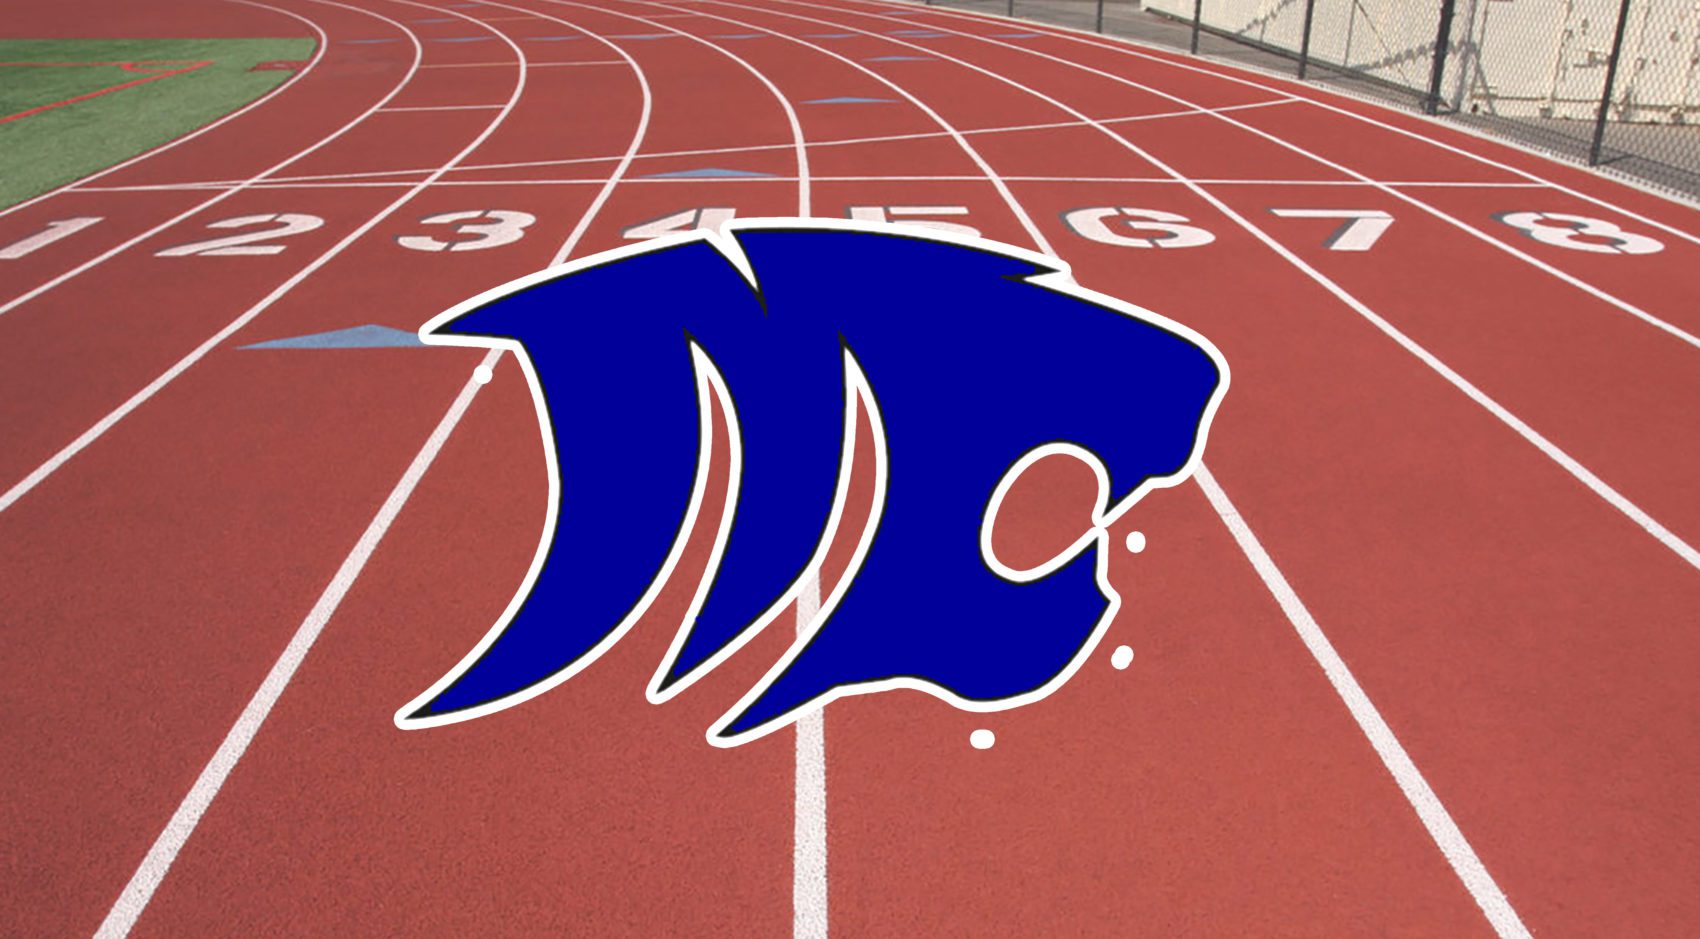 Montague girls track captures Division 3 regional title on Saturday